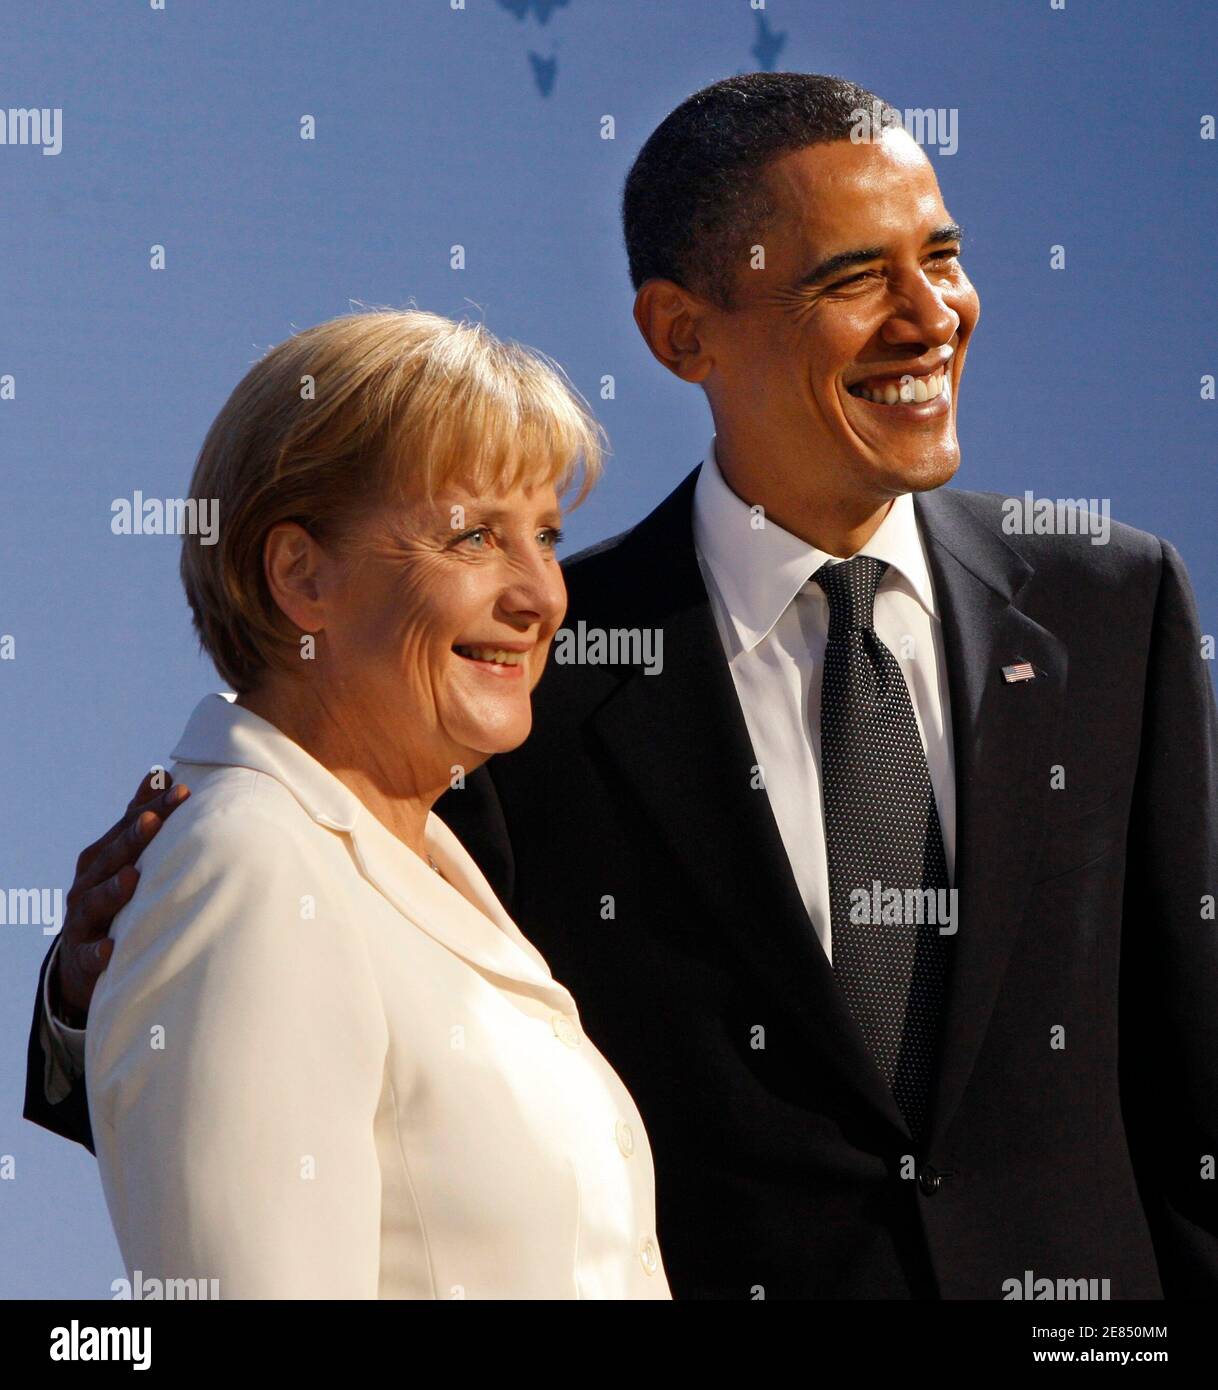 German Chancellor Angela Merkel poses with U.S. President Barack Obama as they arrive at the Phipps Conservatory for an opening reception and working dinner for heads of delegation at the Pittsburgh G20 Summit in Pittsburgh, Pennsylvania, September 24, 2009.     REUTERS/Chris Wattie (UNITED STATES POLITICS) Stock Photo